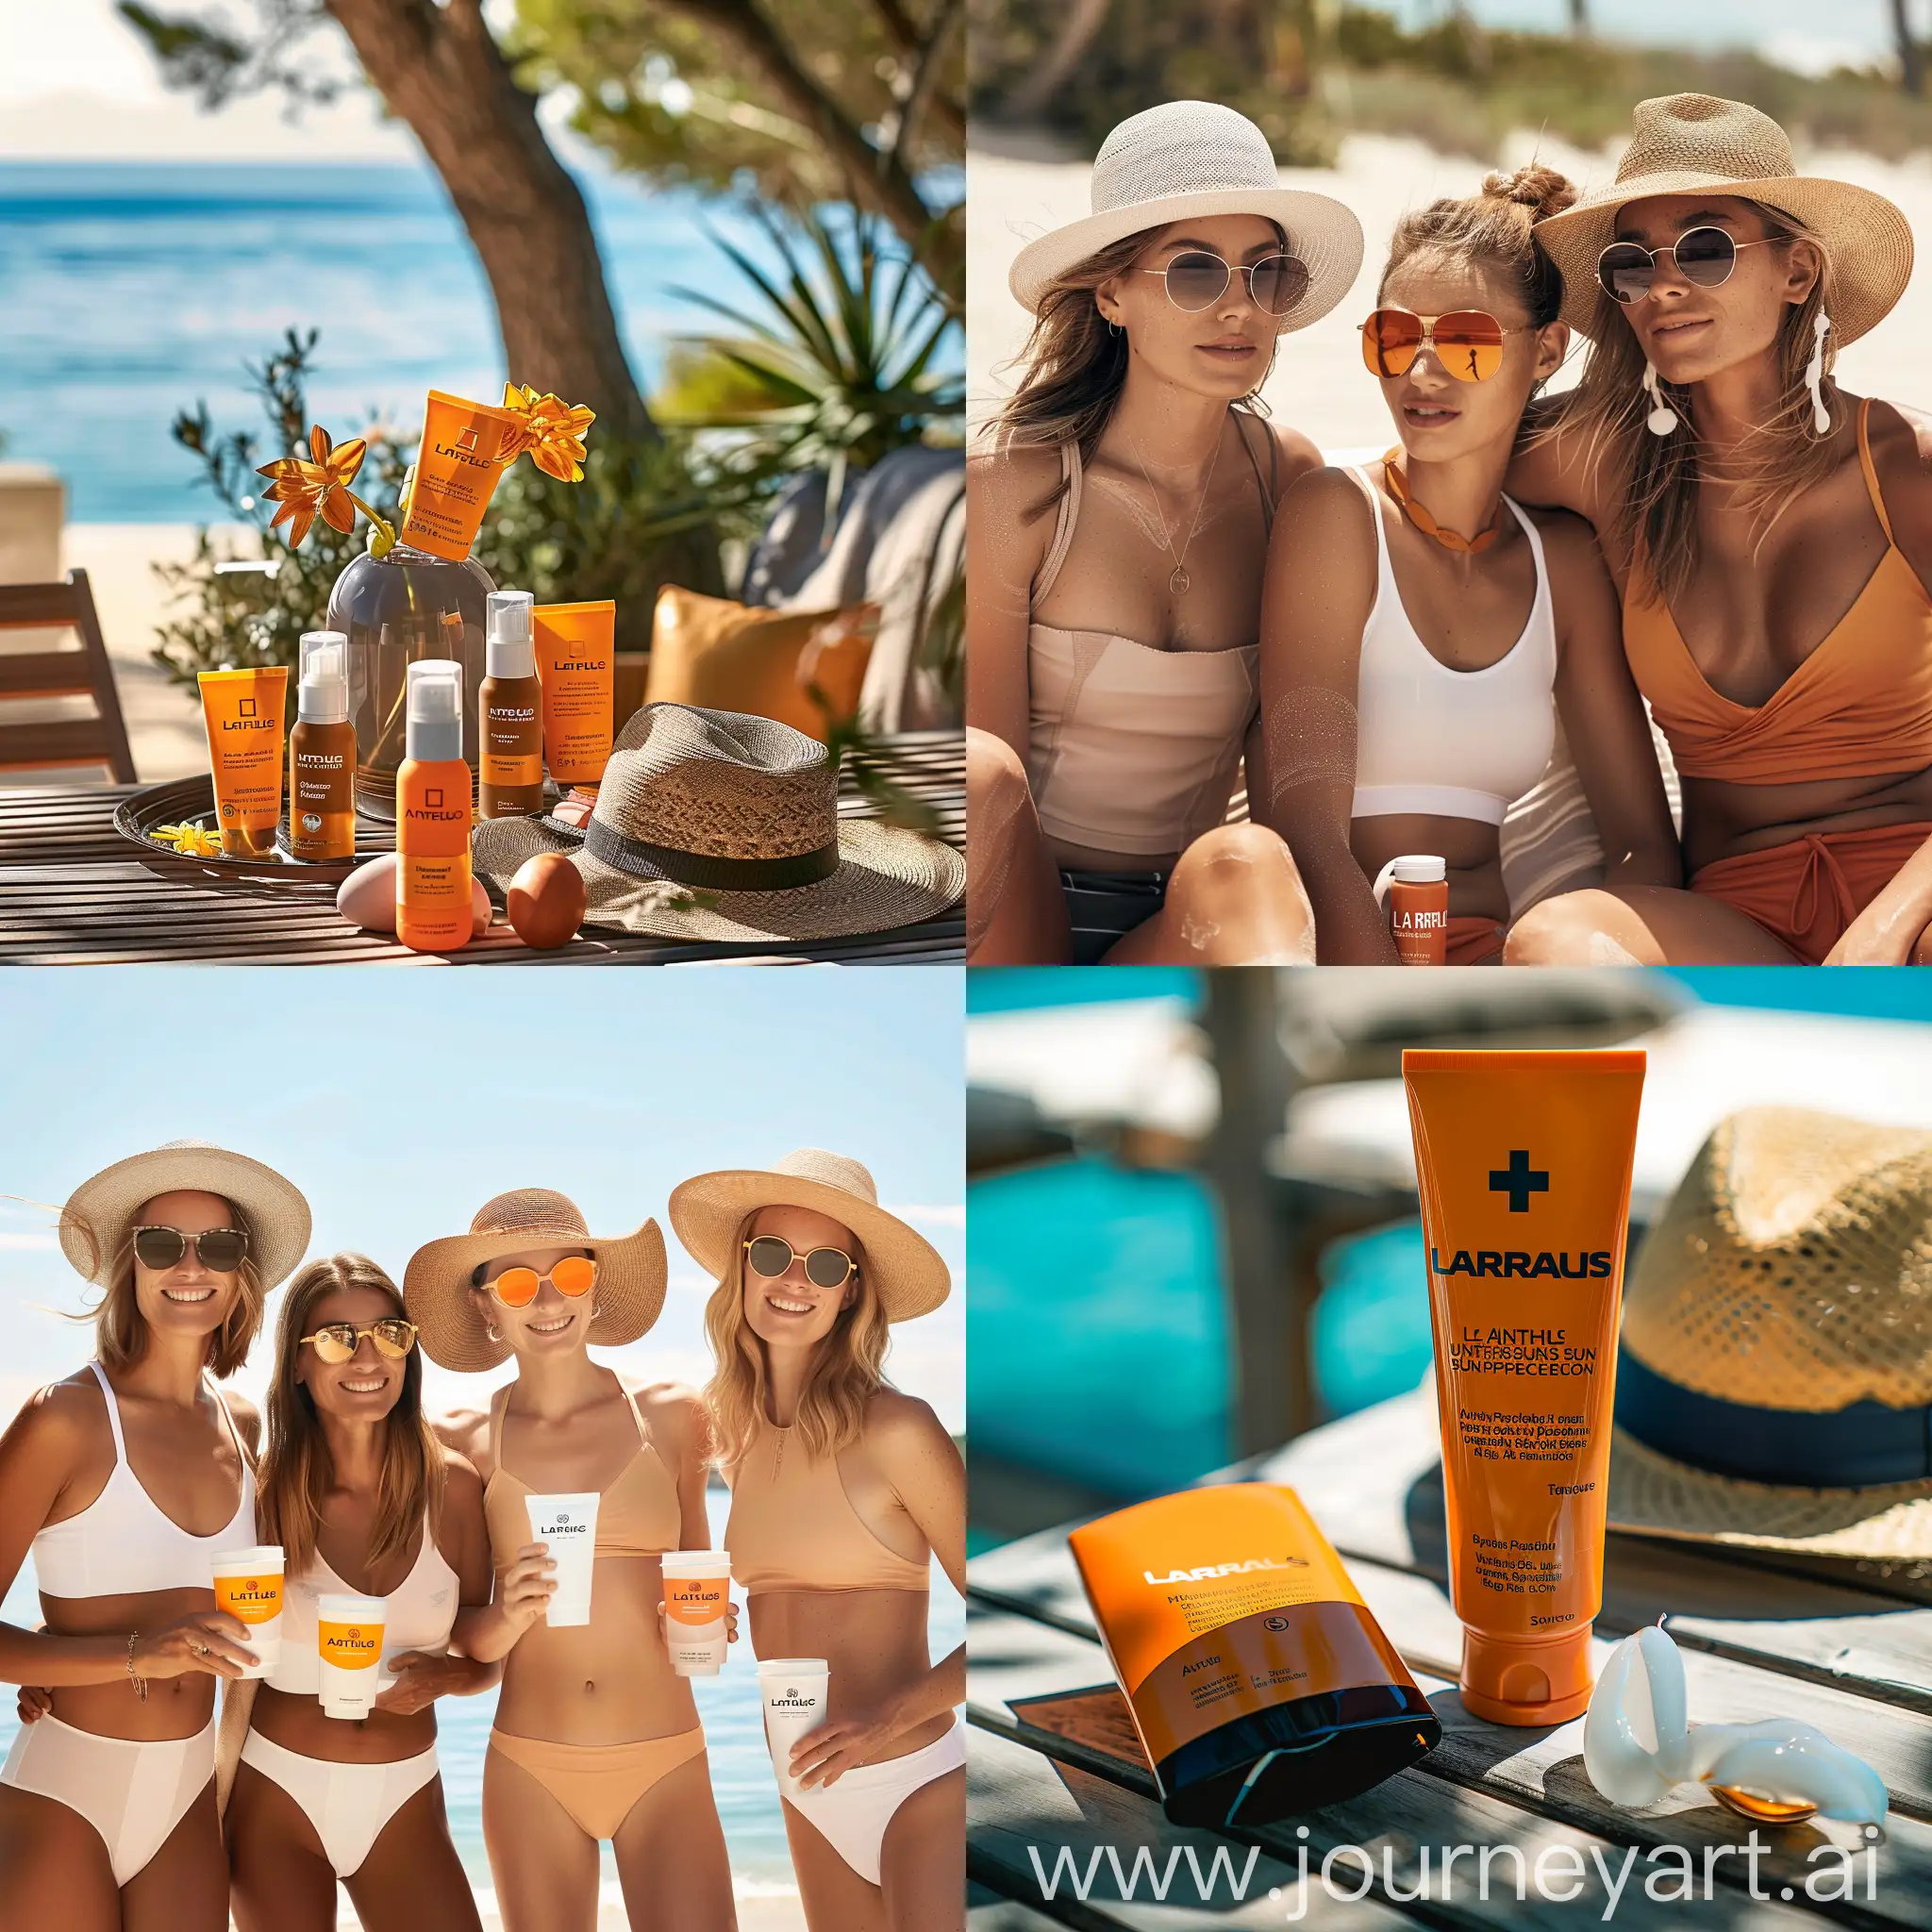 Target Consumers for La Roche Anthelios Sunscreen

Universal Protection: Sunscreen for all ages and skin types.